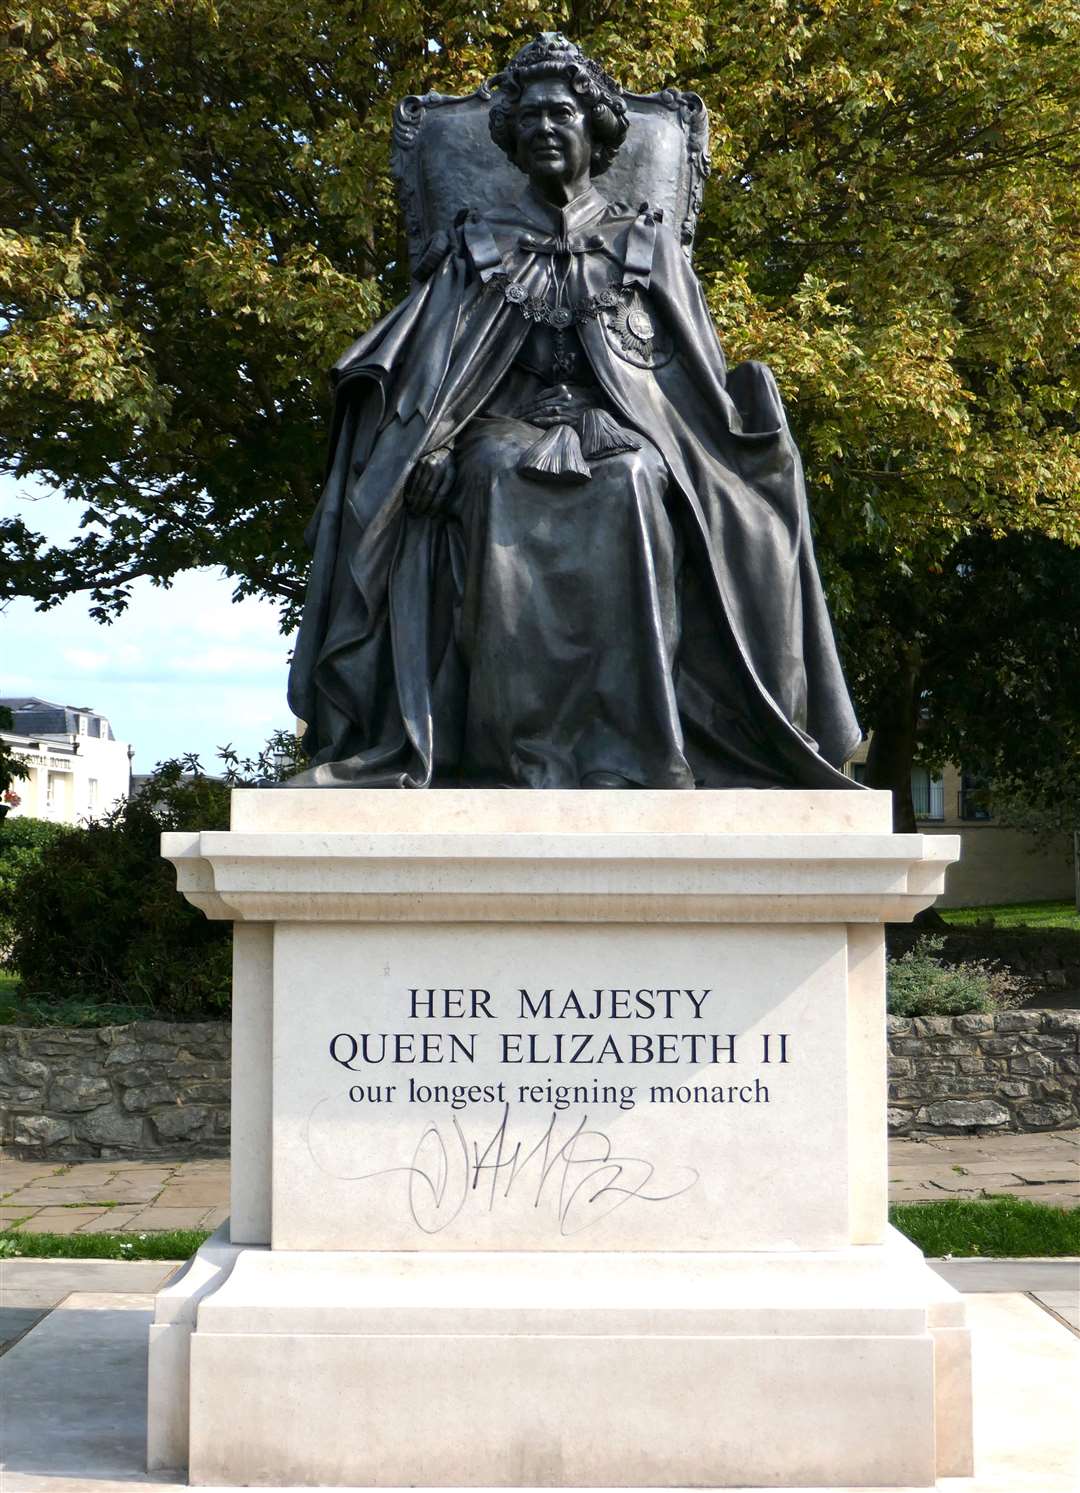 The statue of The Queen in St Andrew's Gardens, Gravesend